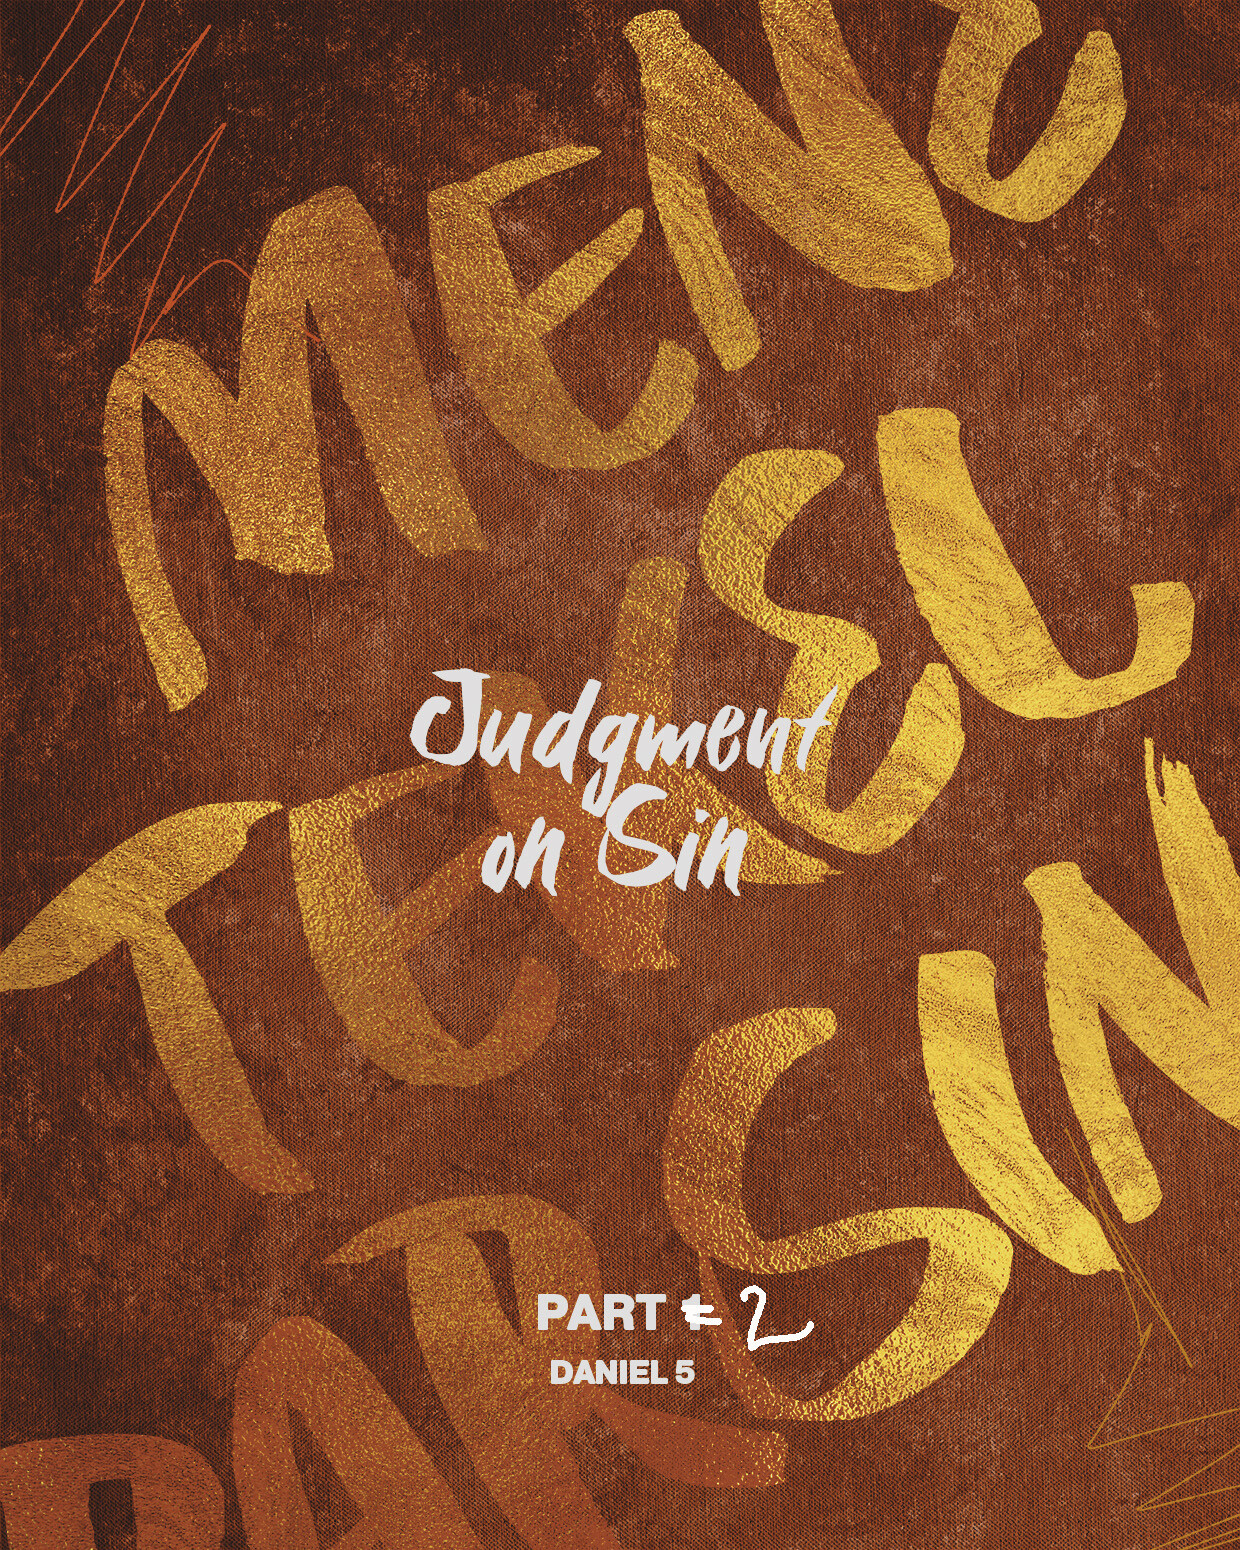 Judgment on Sin | Part 2